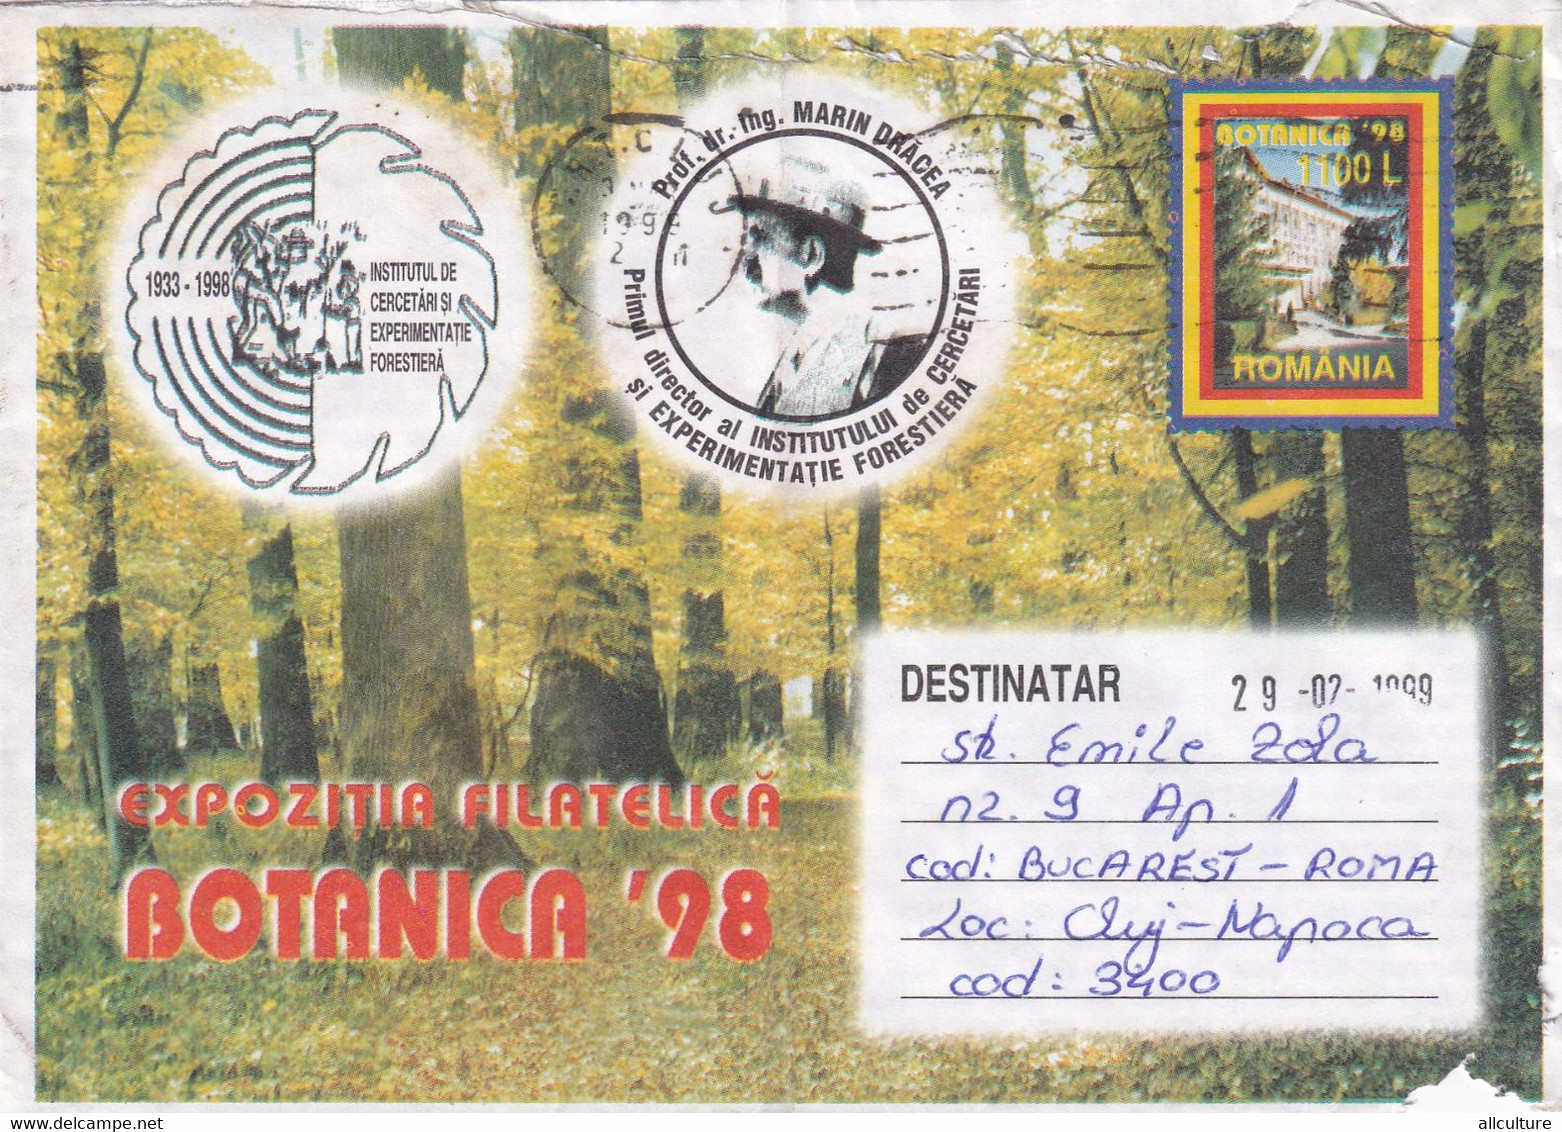 A9636- PHYLATELIC EXHIBITION BOTANICA '98 ROMANIA COVER STATIONERY, FOREST RESEARCH AND EXPERIMENTATION INSTITUTE 1999 - Brieven En Documenten